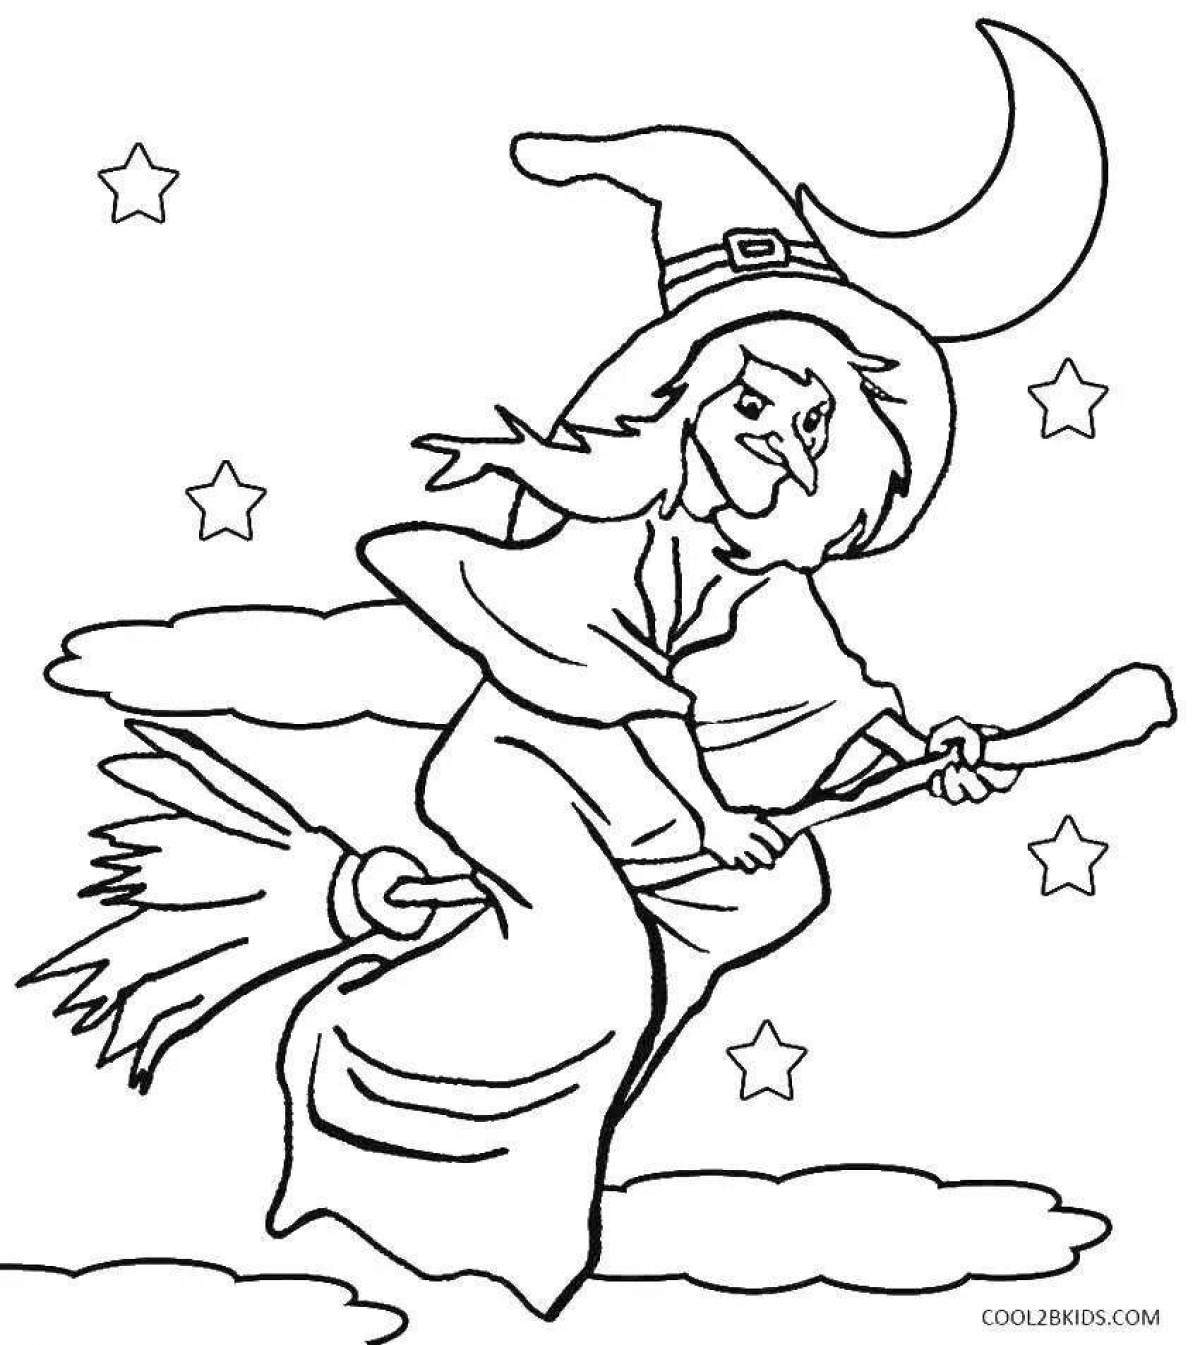 Evil witch coloring book